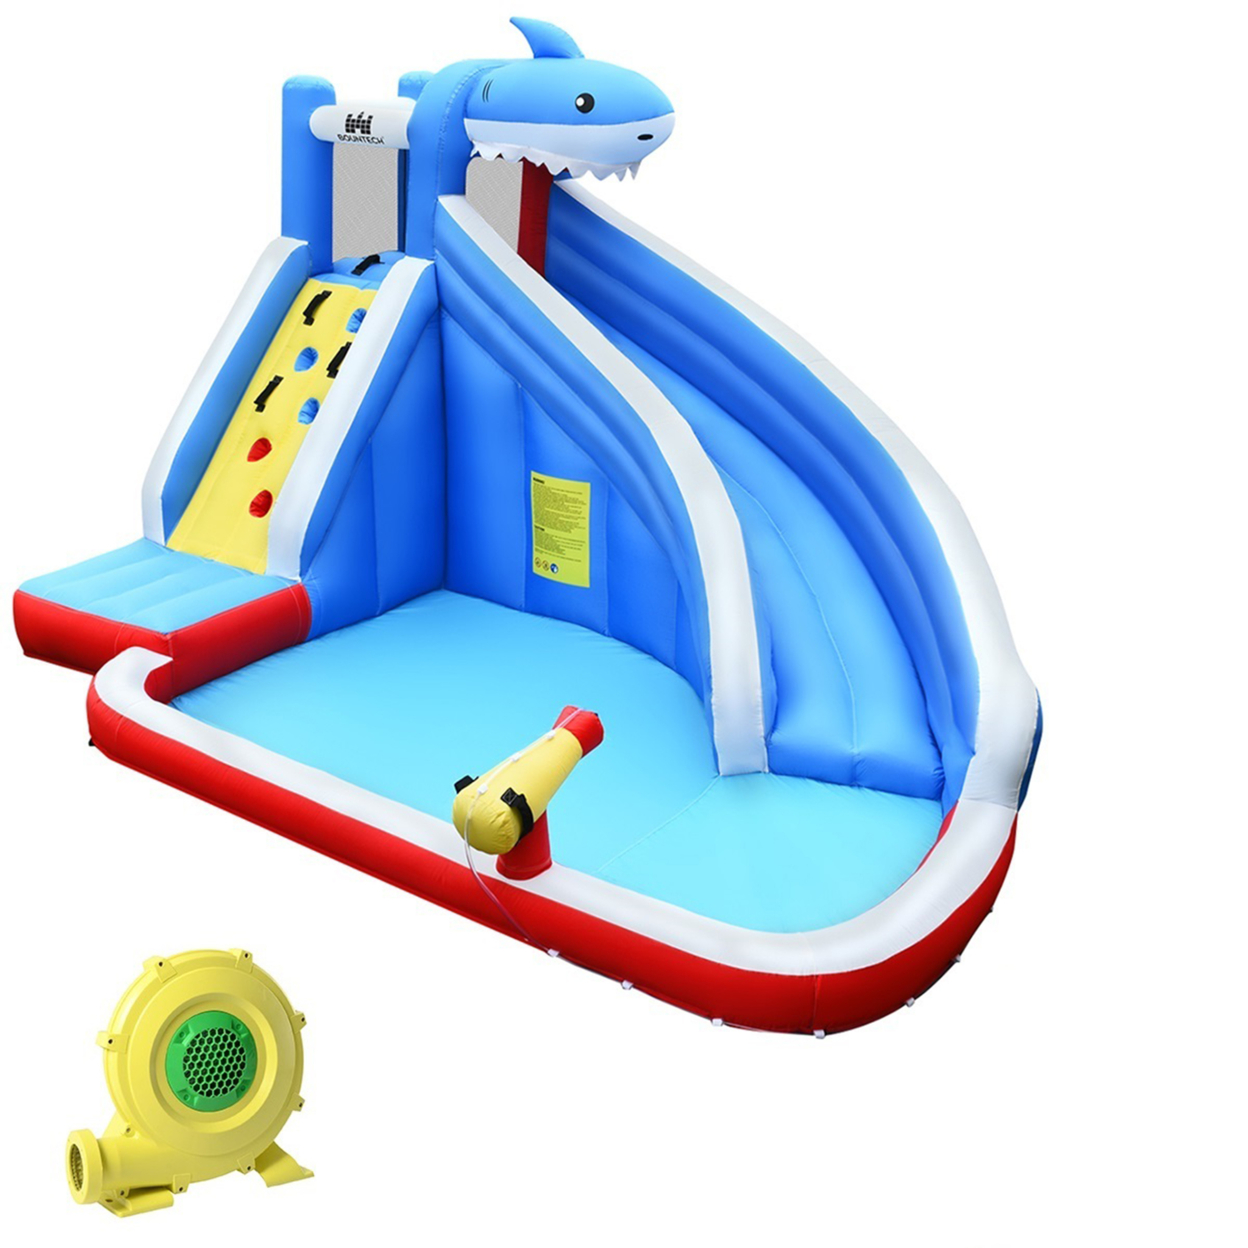 Inflatable Water Park Bounce House Slide Shark With/without Blower - With 750W Blower